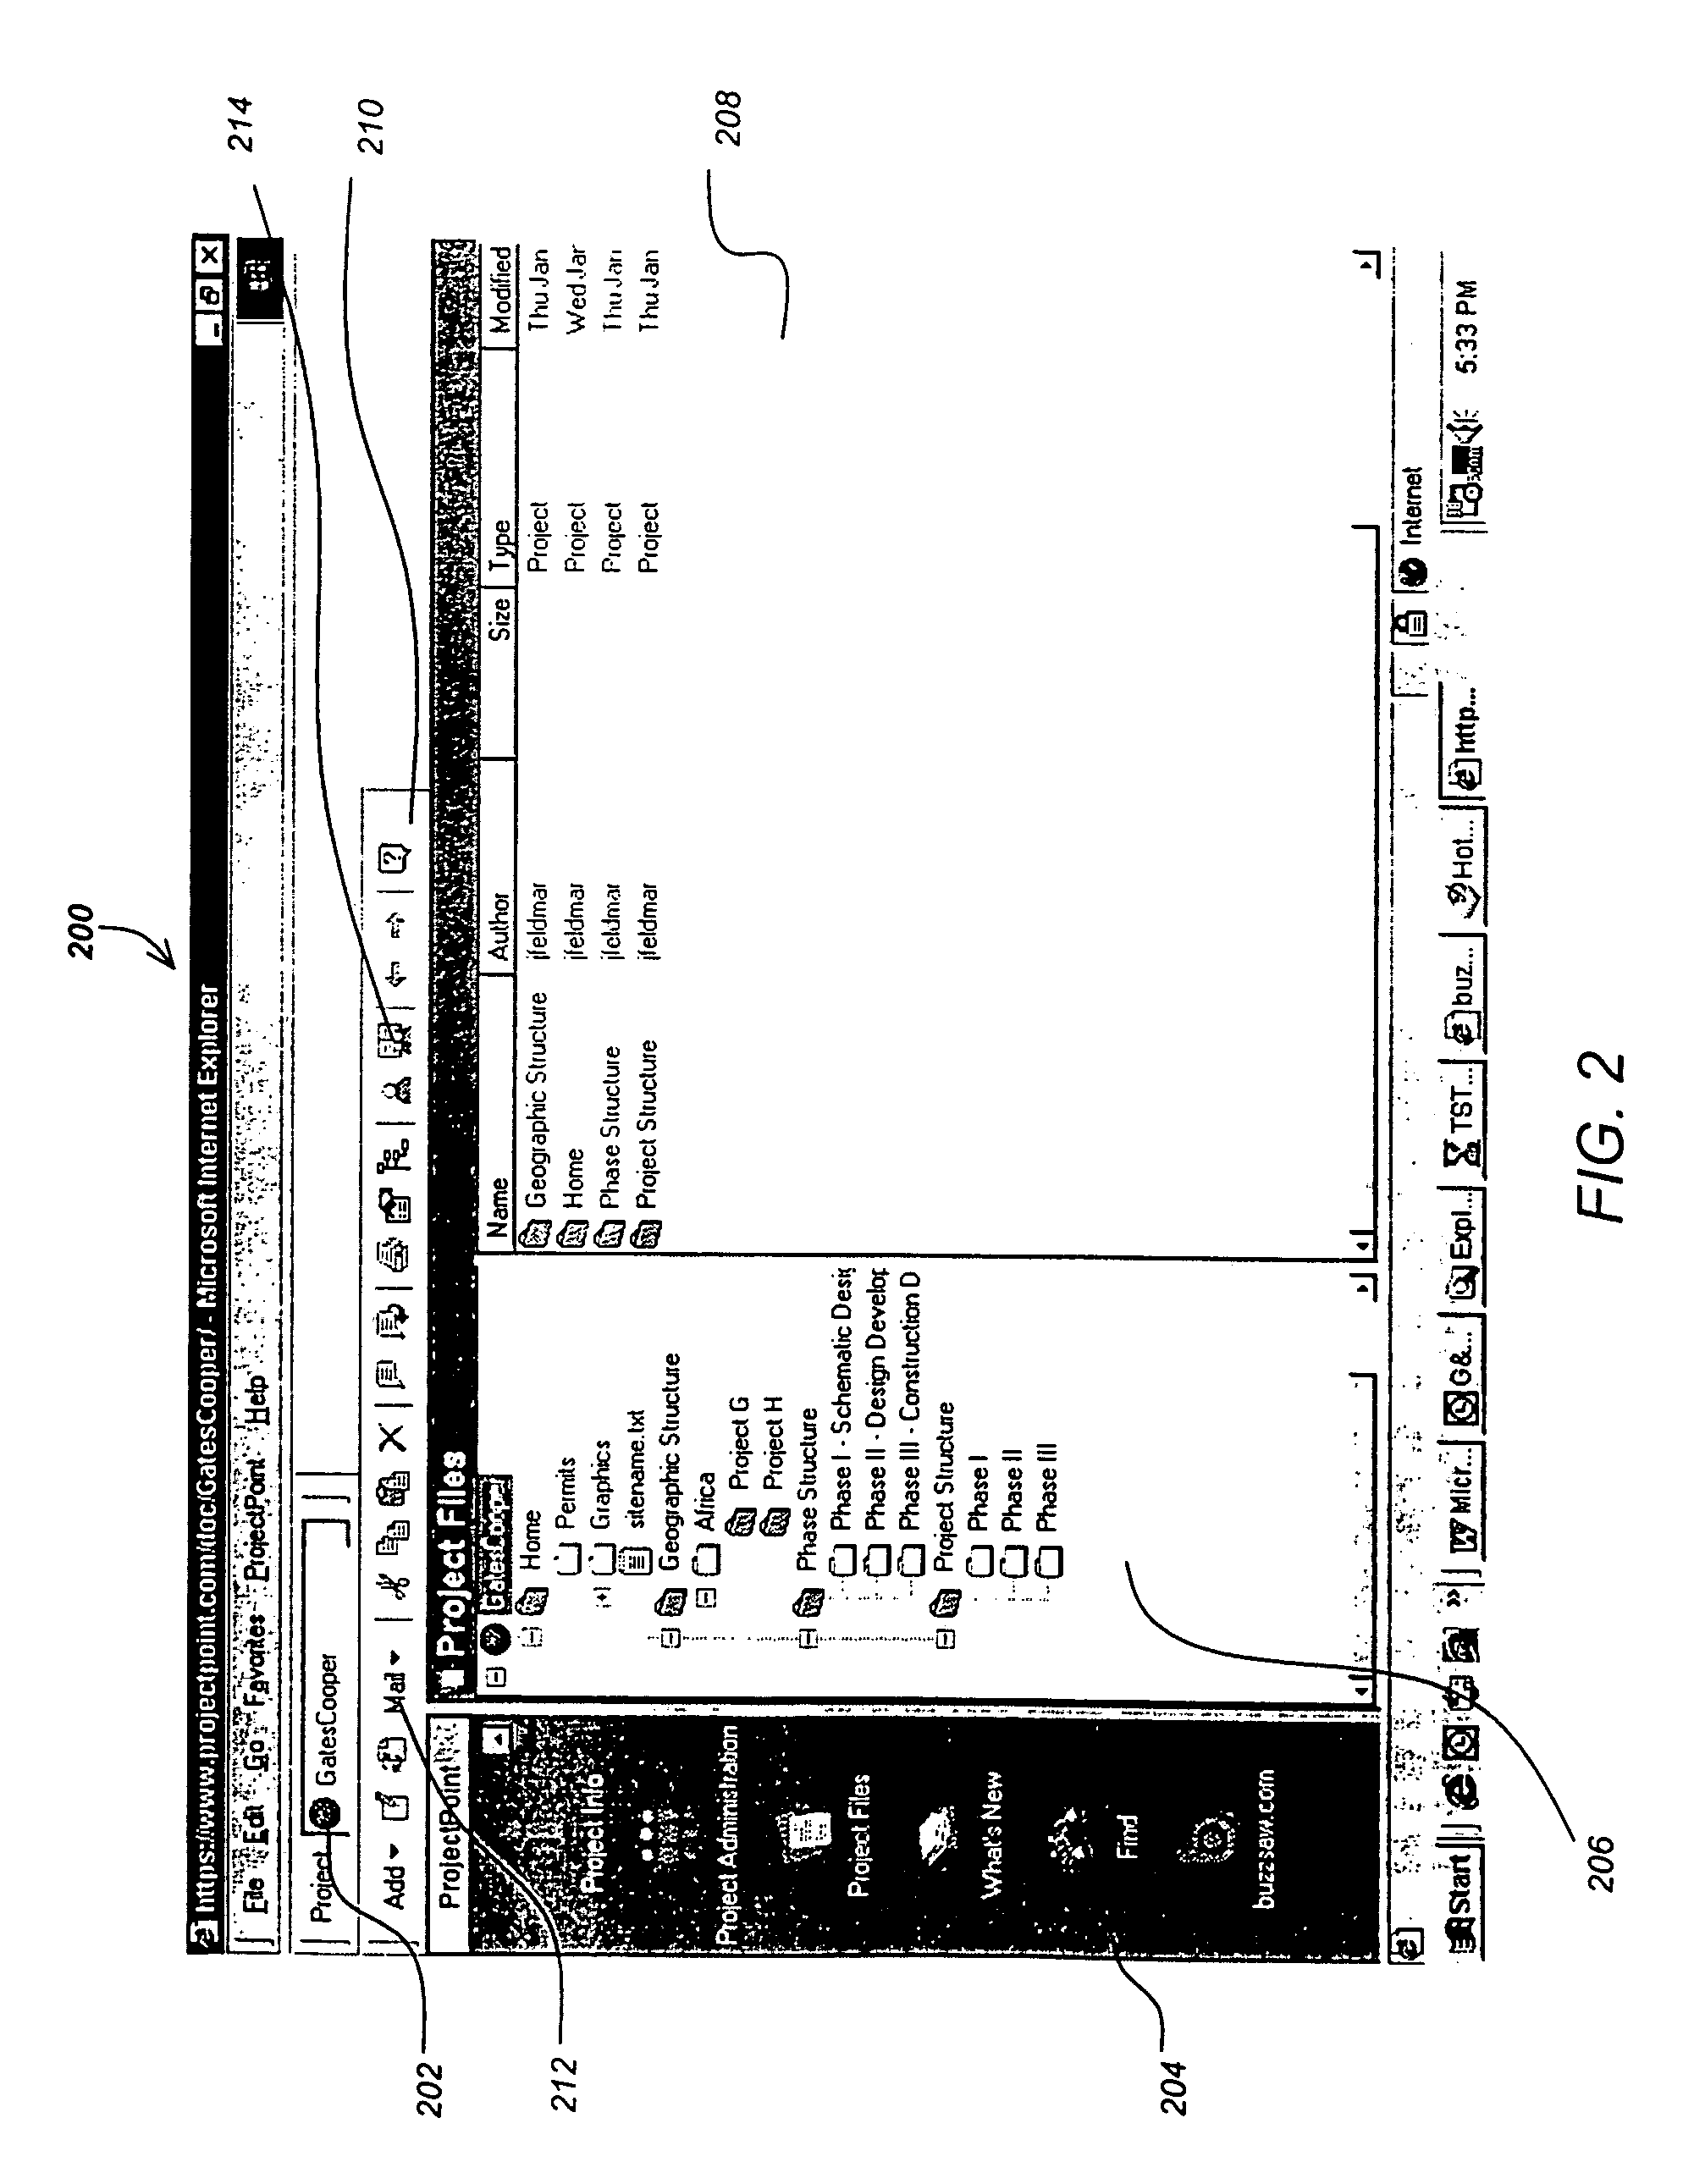 Method and apparatus for drawing collaboration on a network